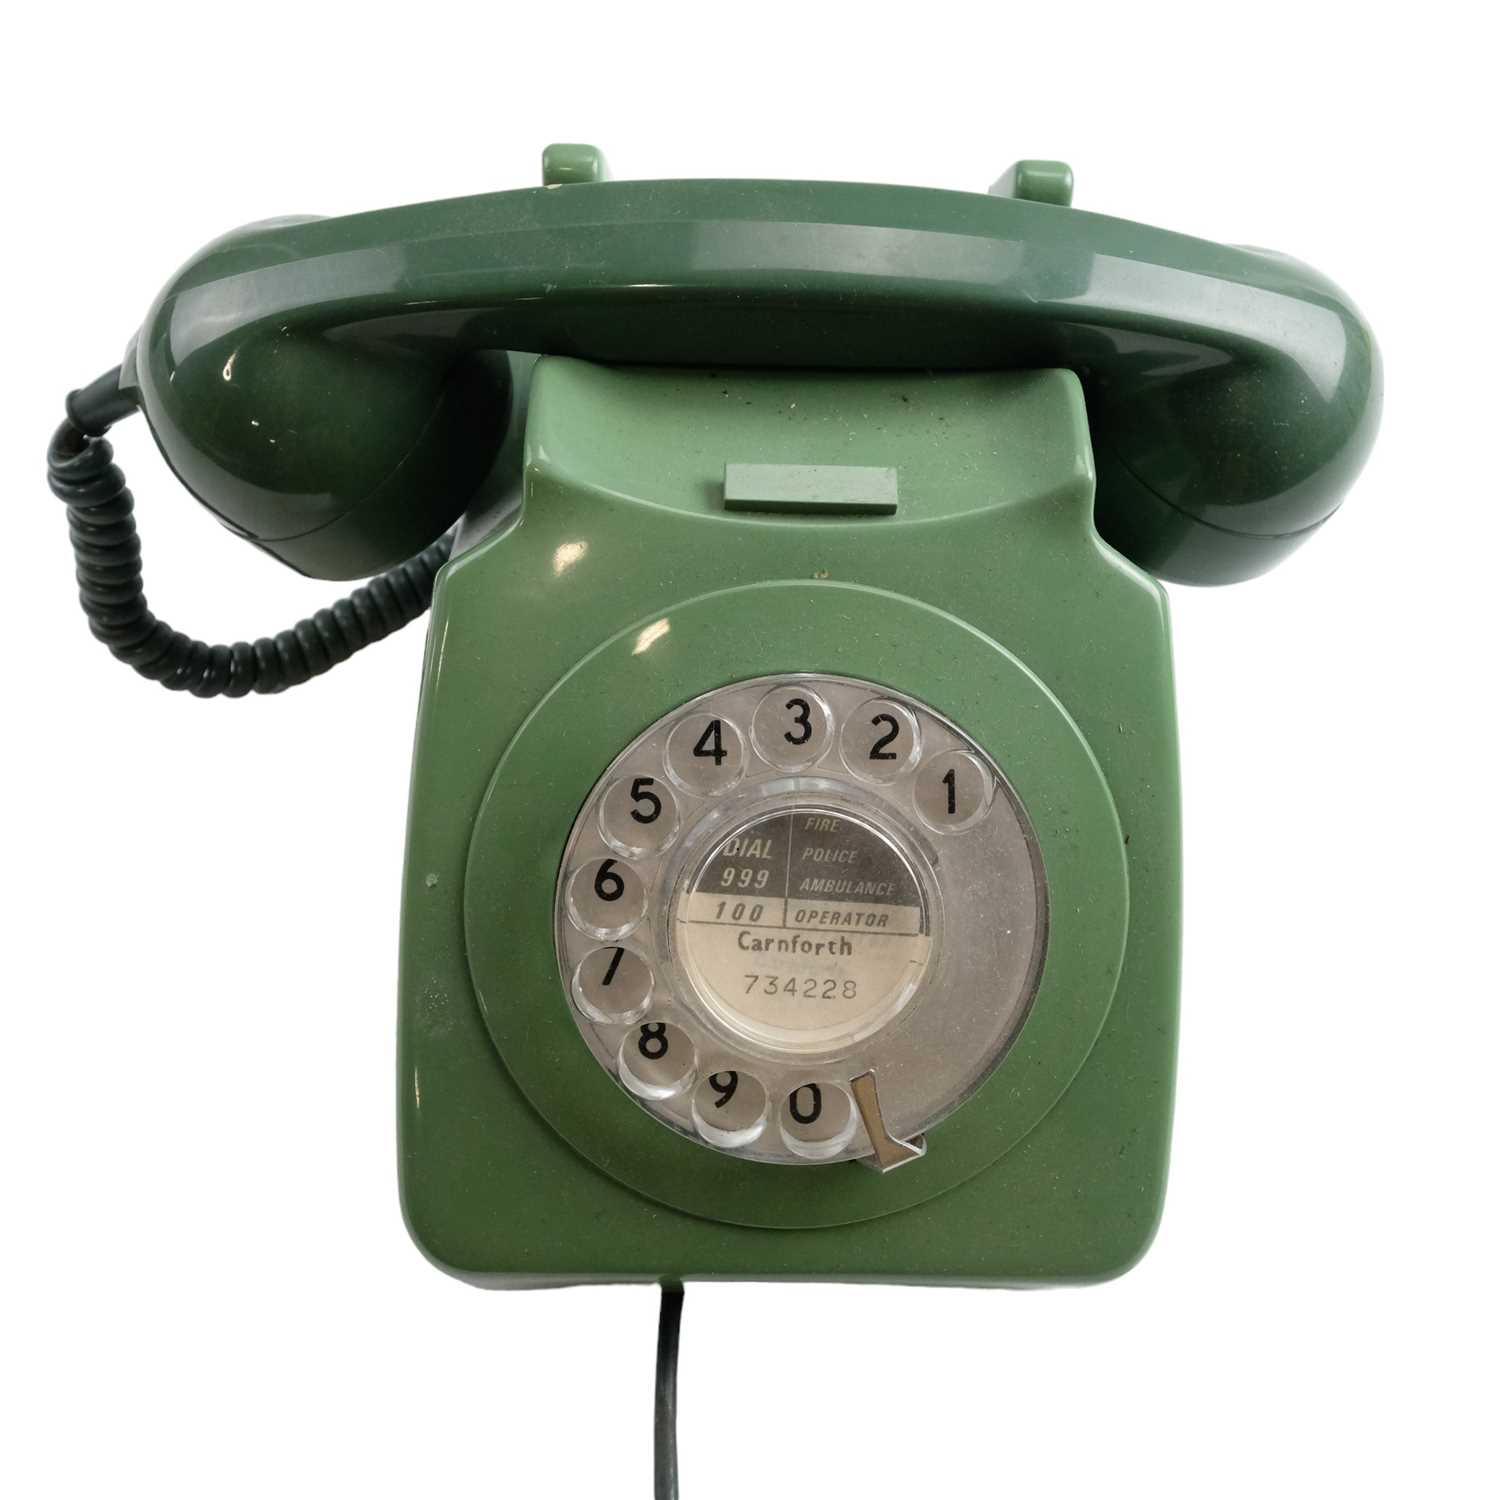 Eight 700 series rotary dial telephones, models 706 L, 706 F, 746 GNA and 746 GEN - Image 9 of 9